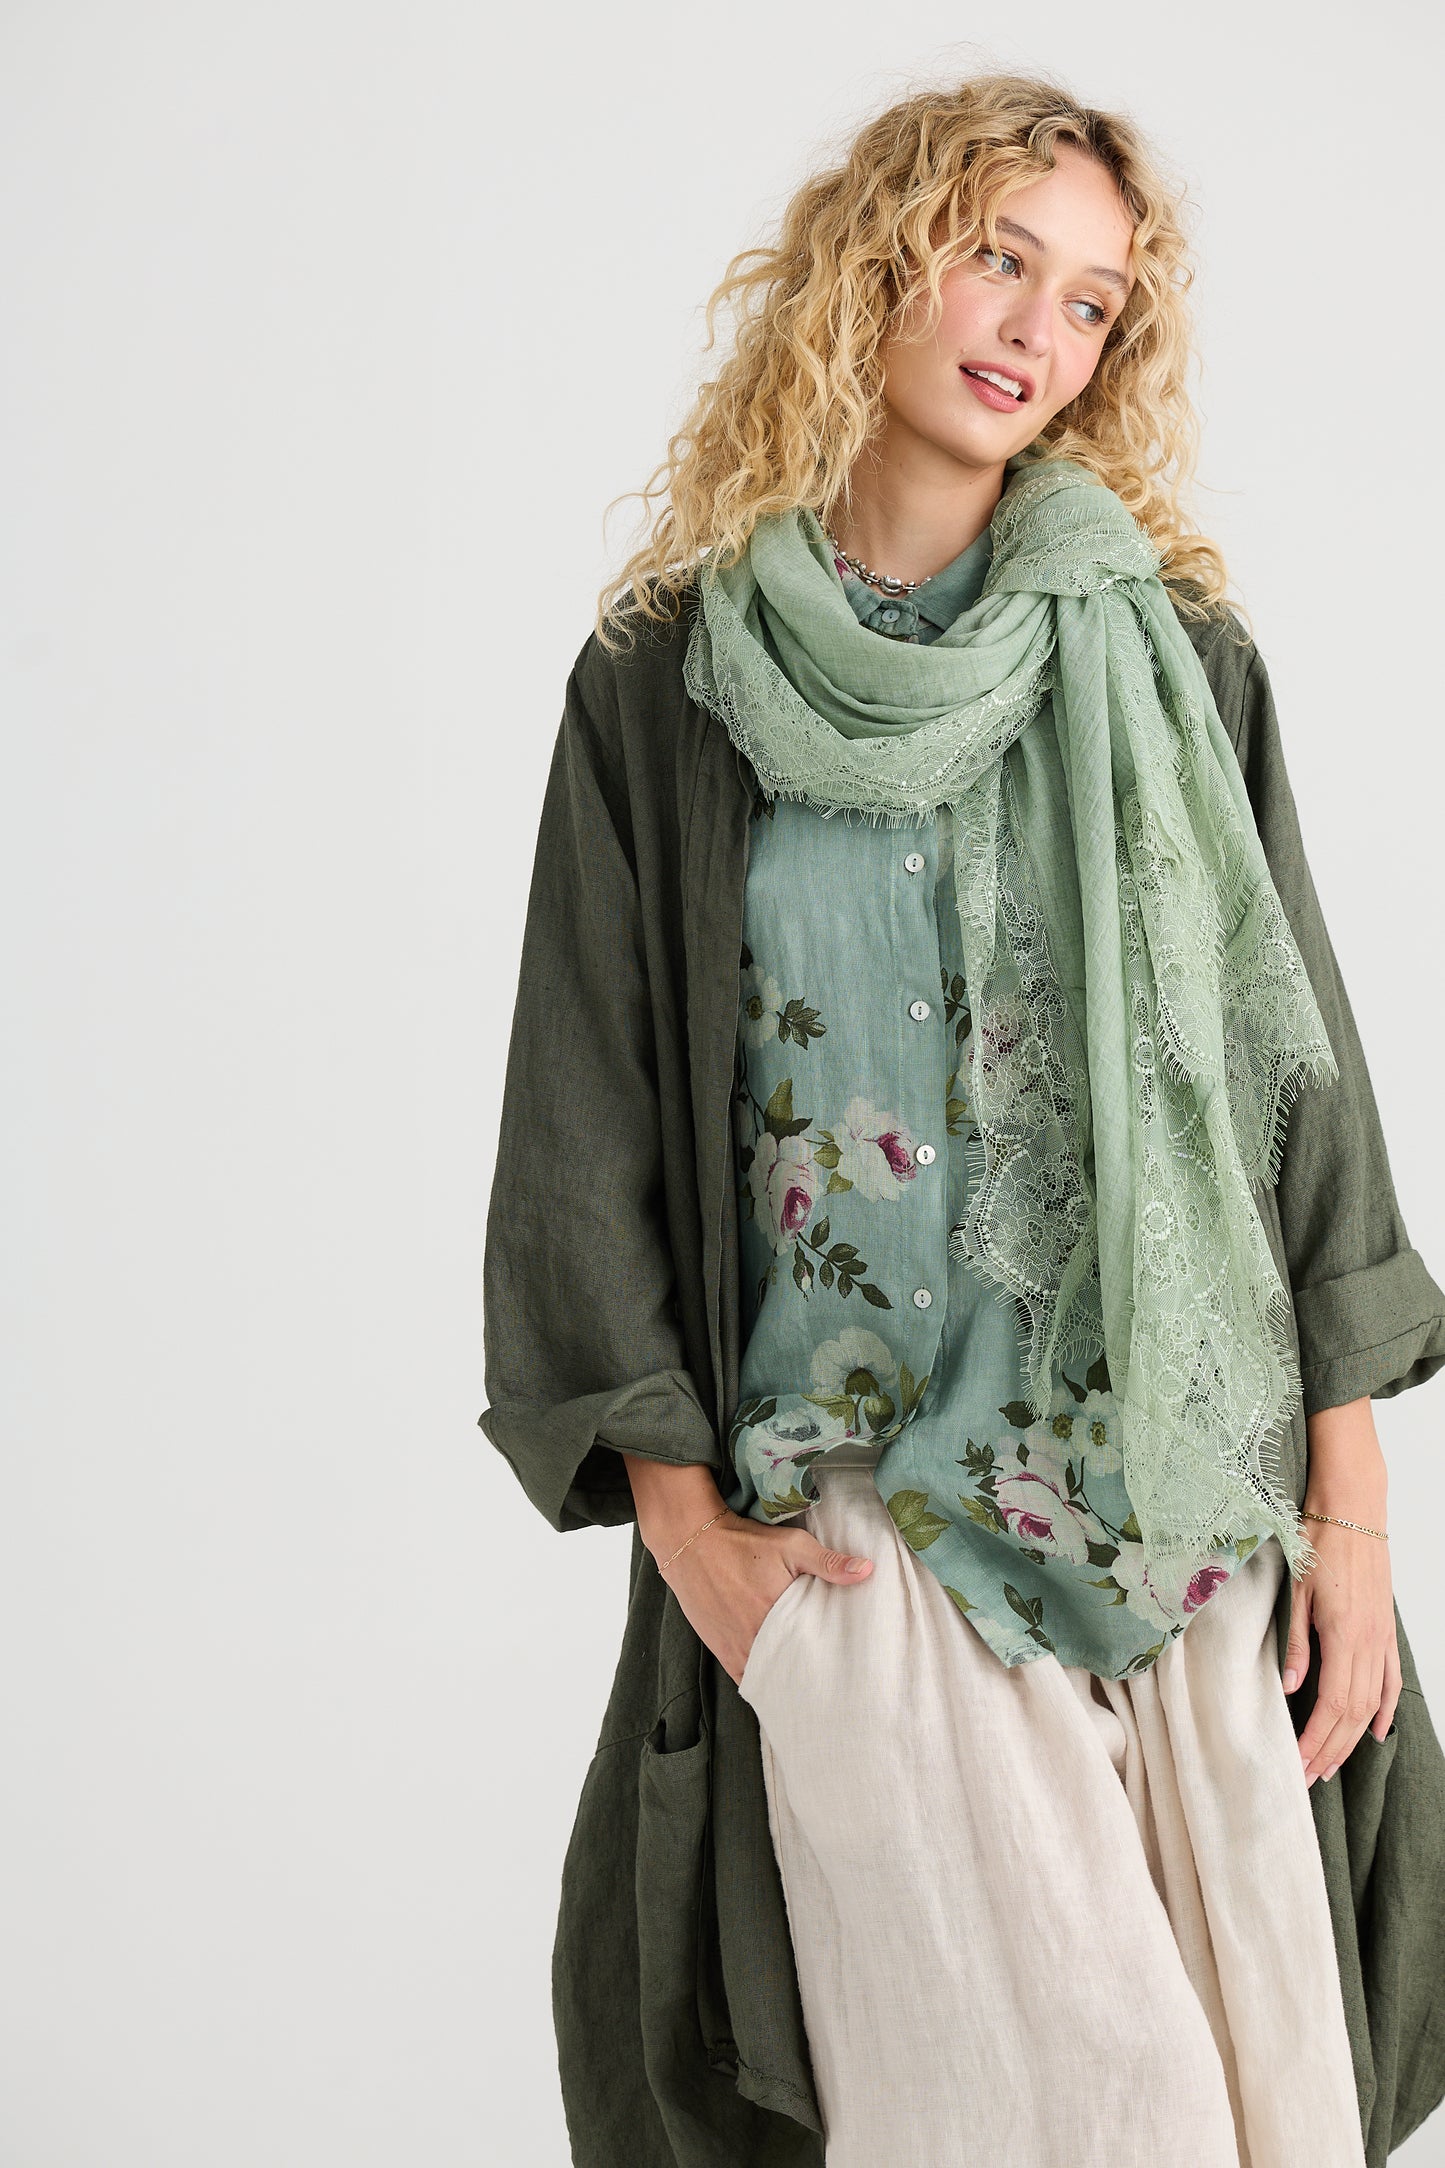 Midsummer`s Dream Cotton and lace scarf. Pastel green